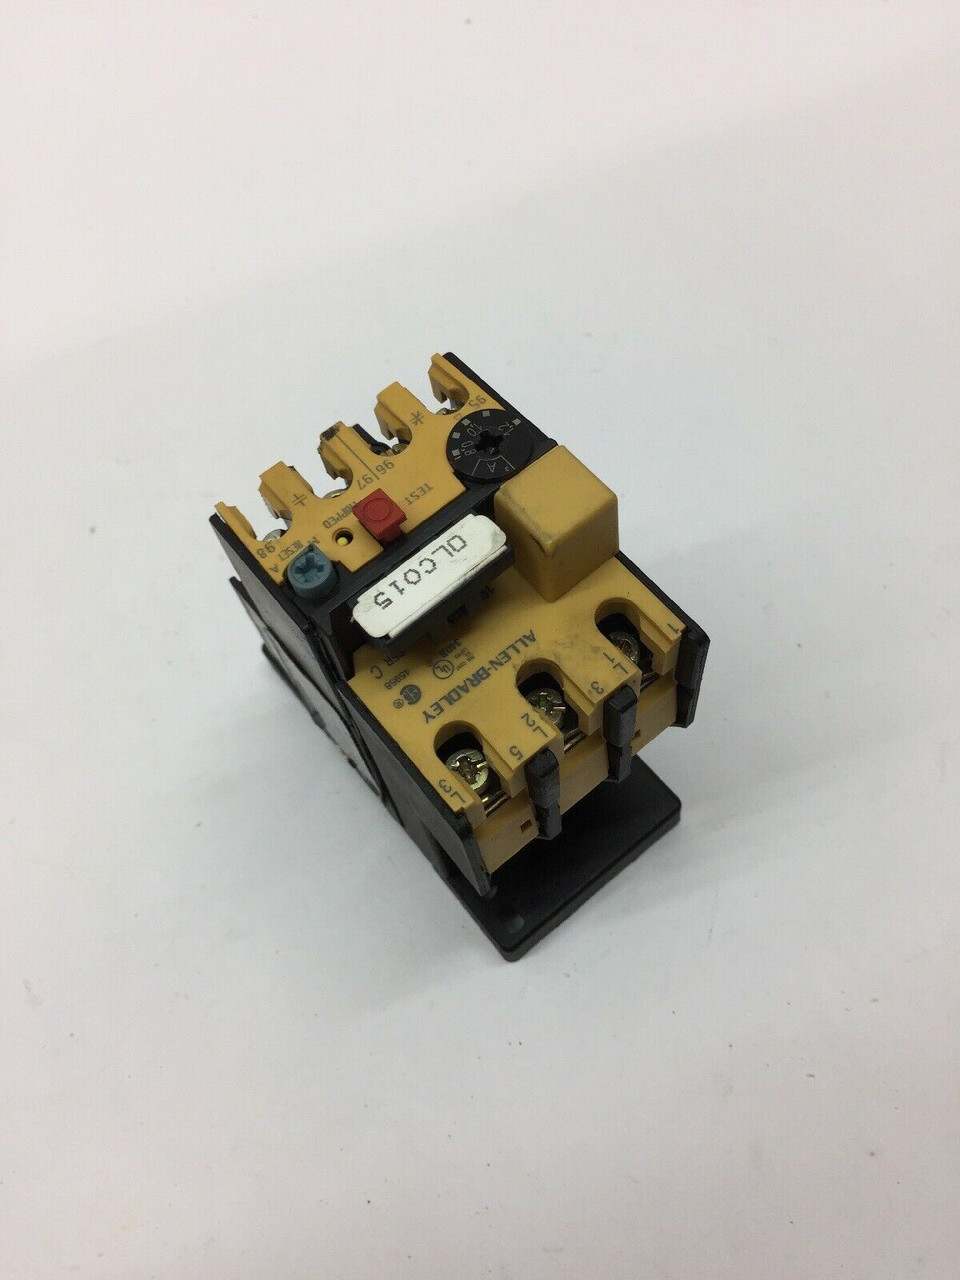 Thermal Relay 193-BSB12 Allen Bradley with 193-BPM1 SER C Base Mounting Adapter